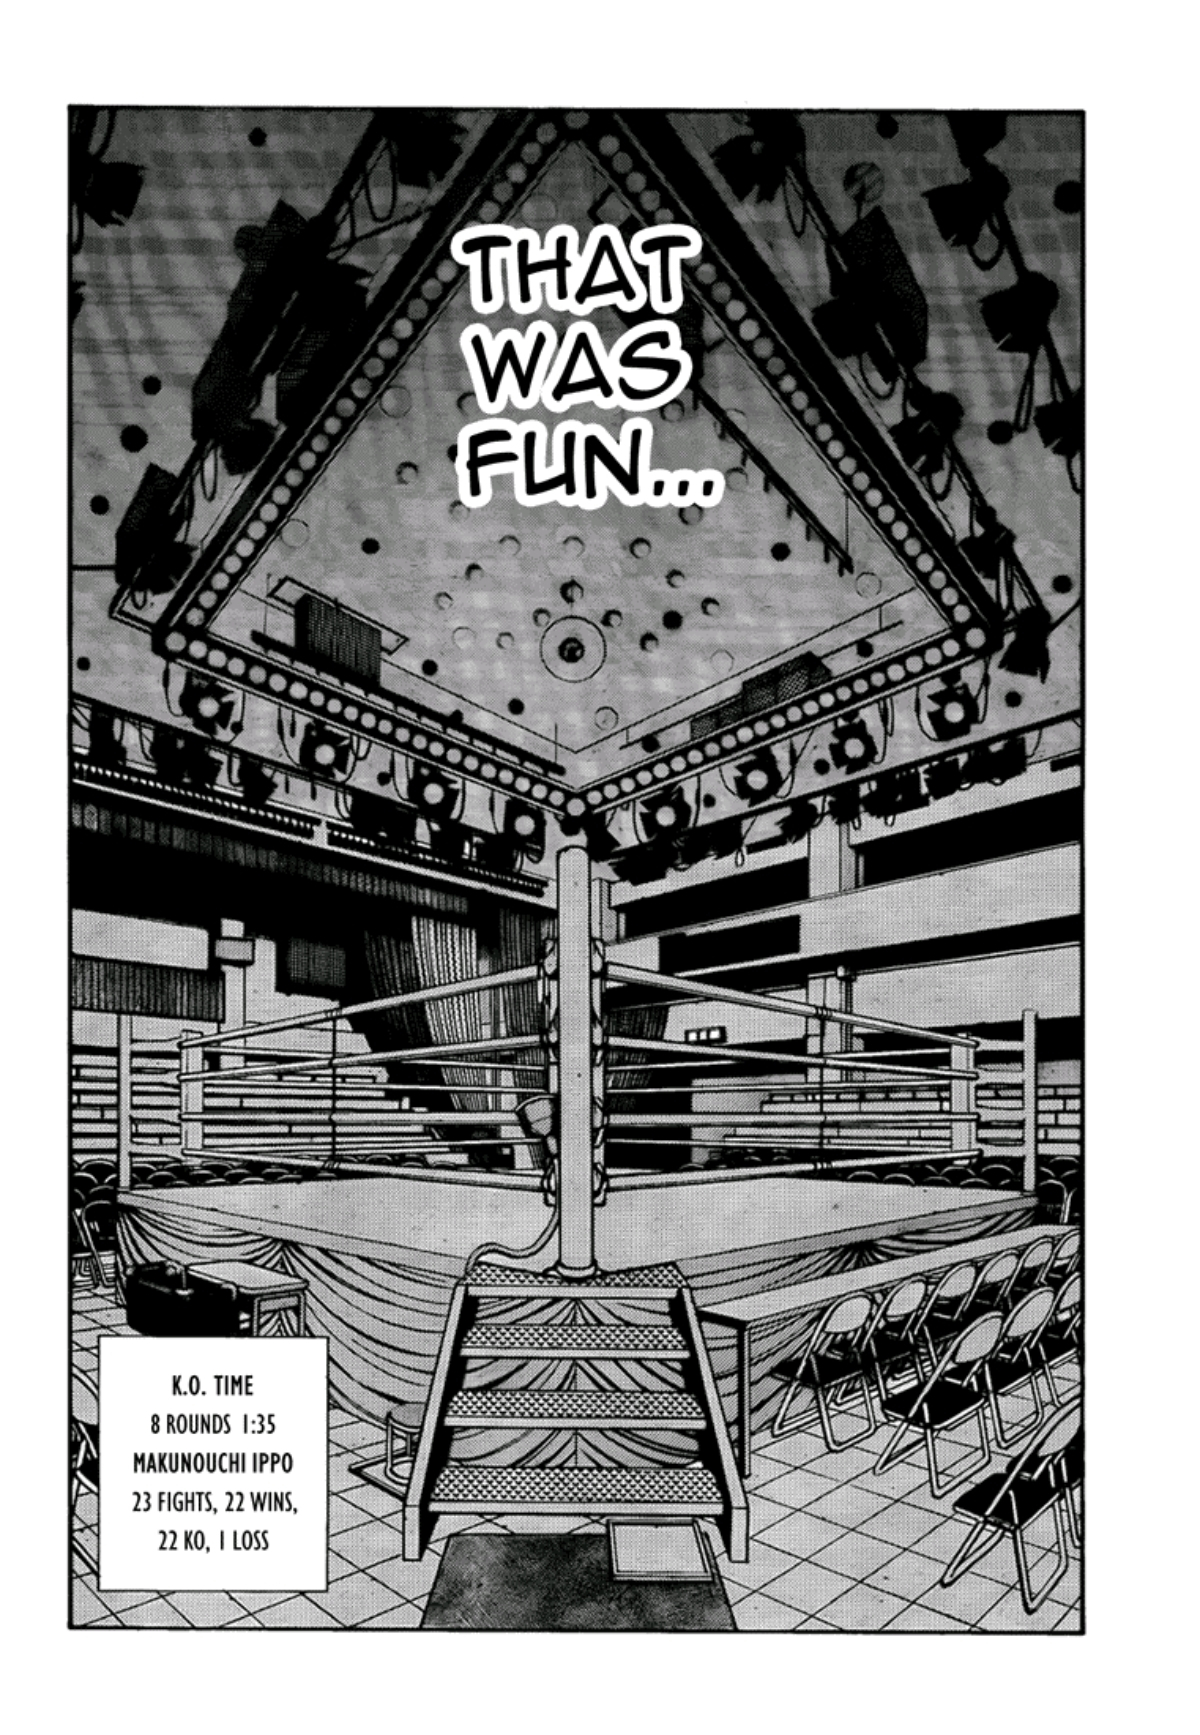 A boxing ring illustrated from the corner. Text reads: That was fun. Ippo's record is 23 fights, 22 wins, 1 loss. 